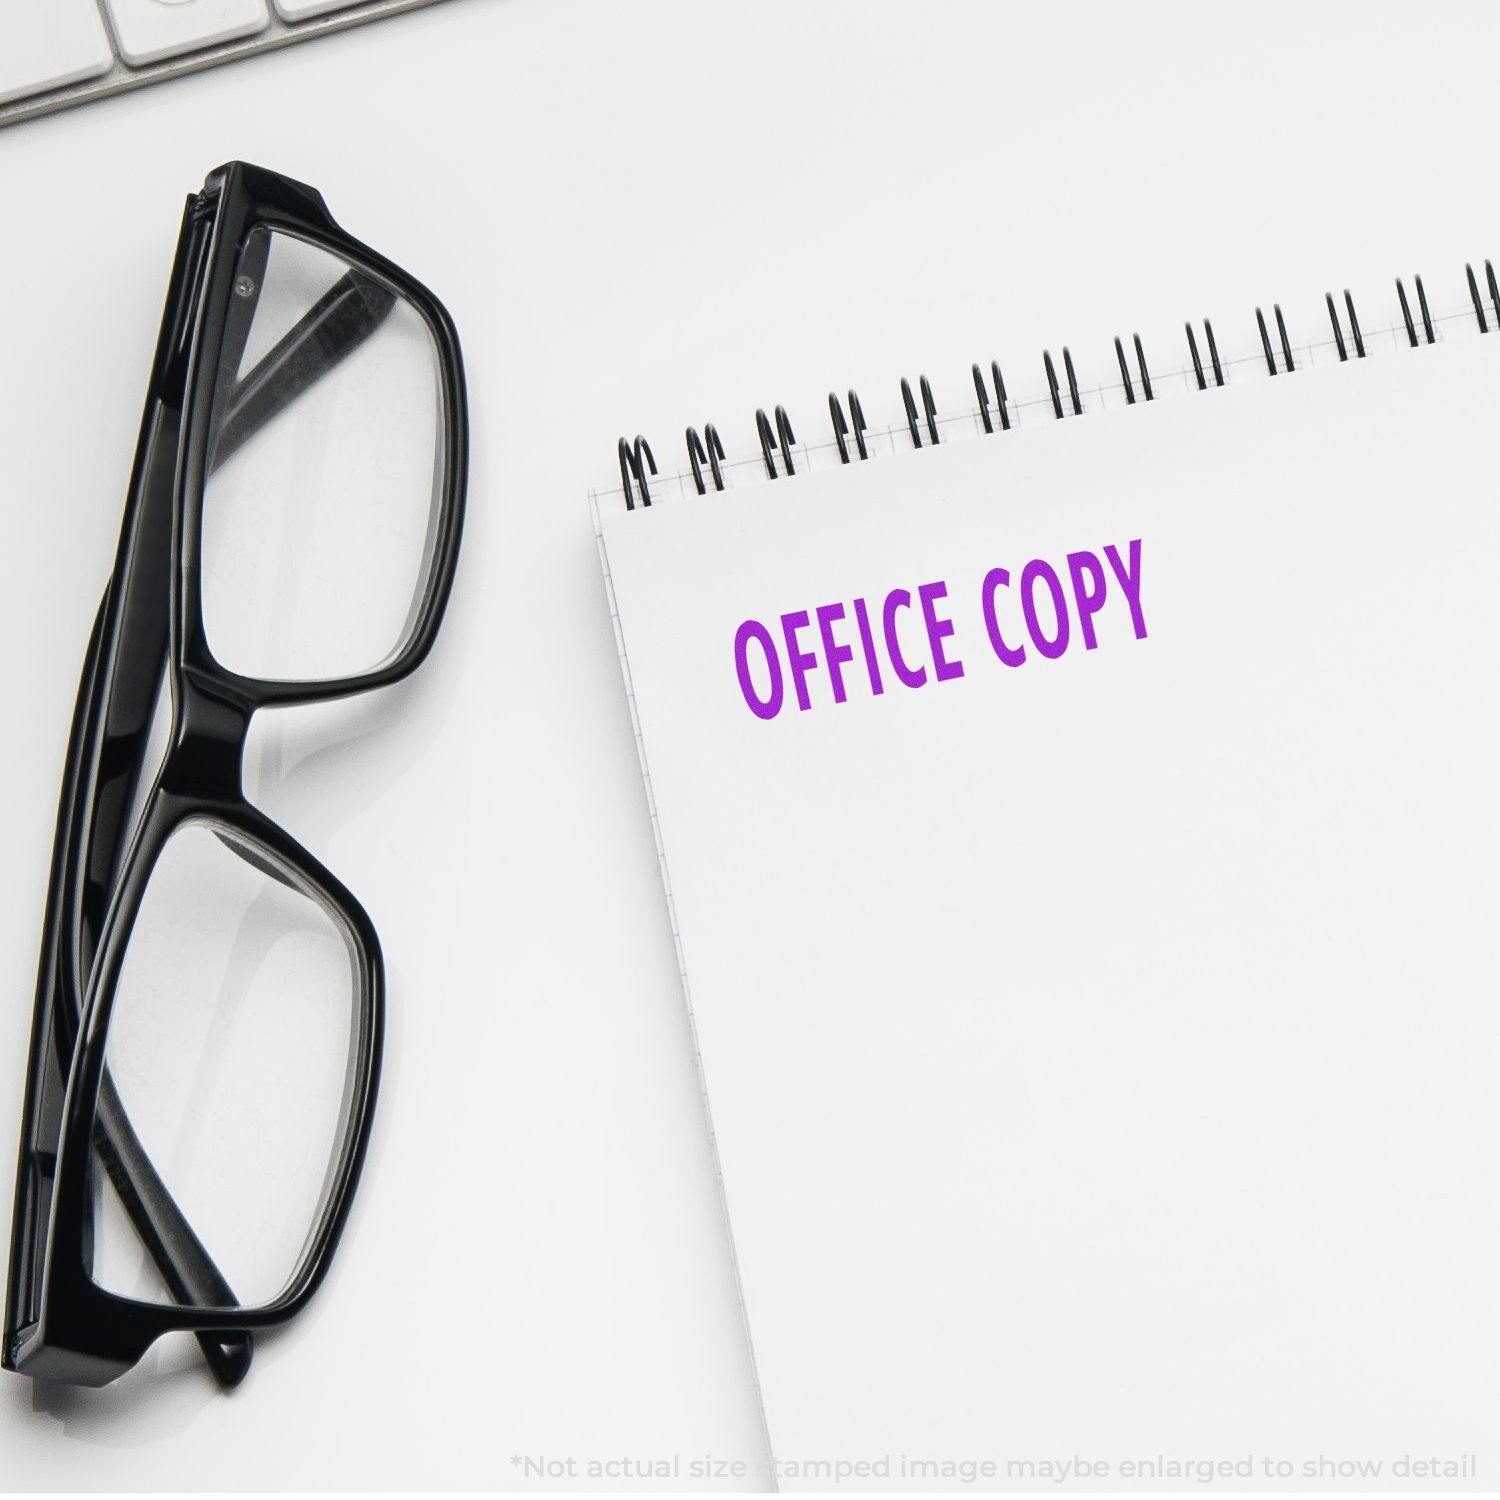 Large Office Copy Rubber Stamp In Use Photo